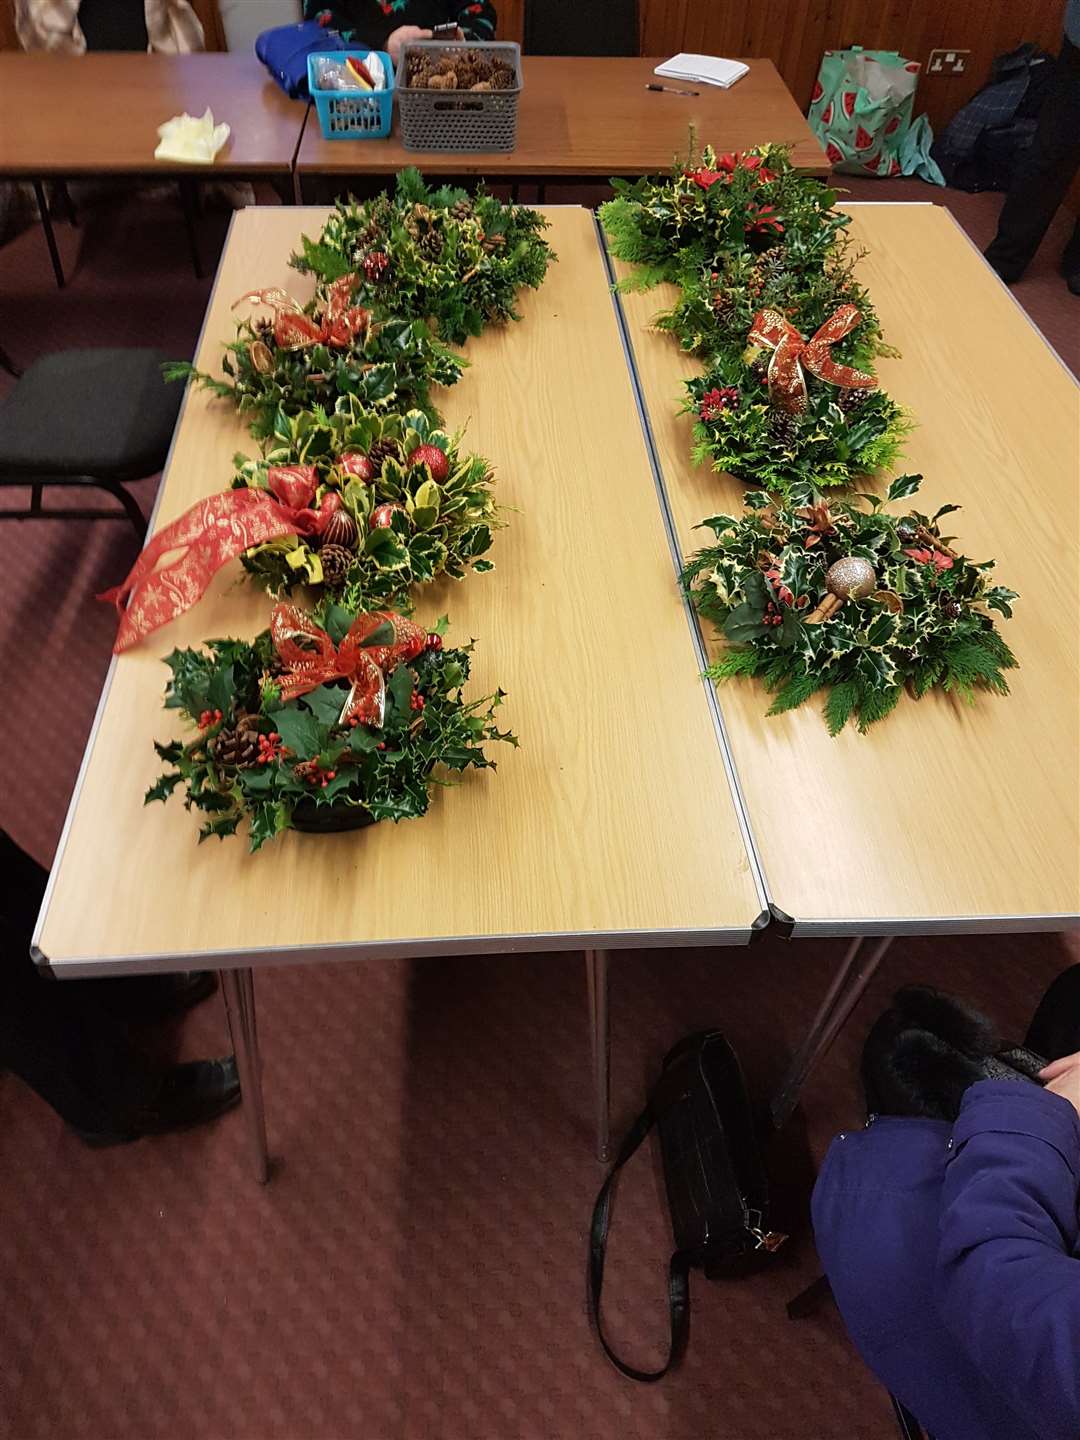 Christmas wreath making was the theme for the Banniskirk SWI December meeting.